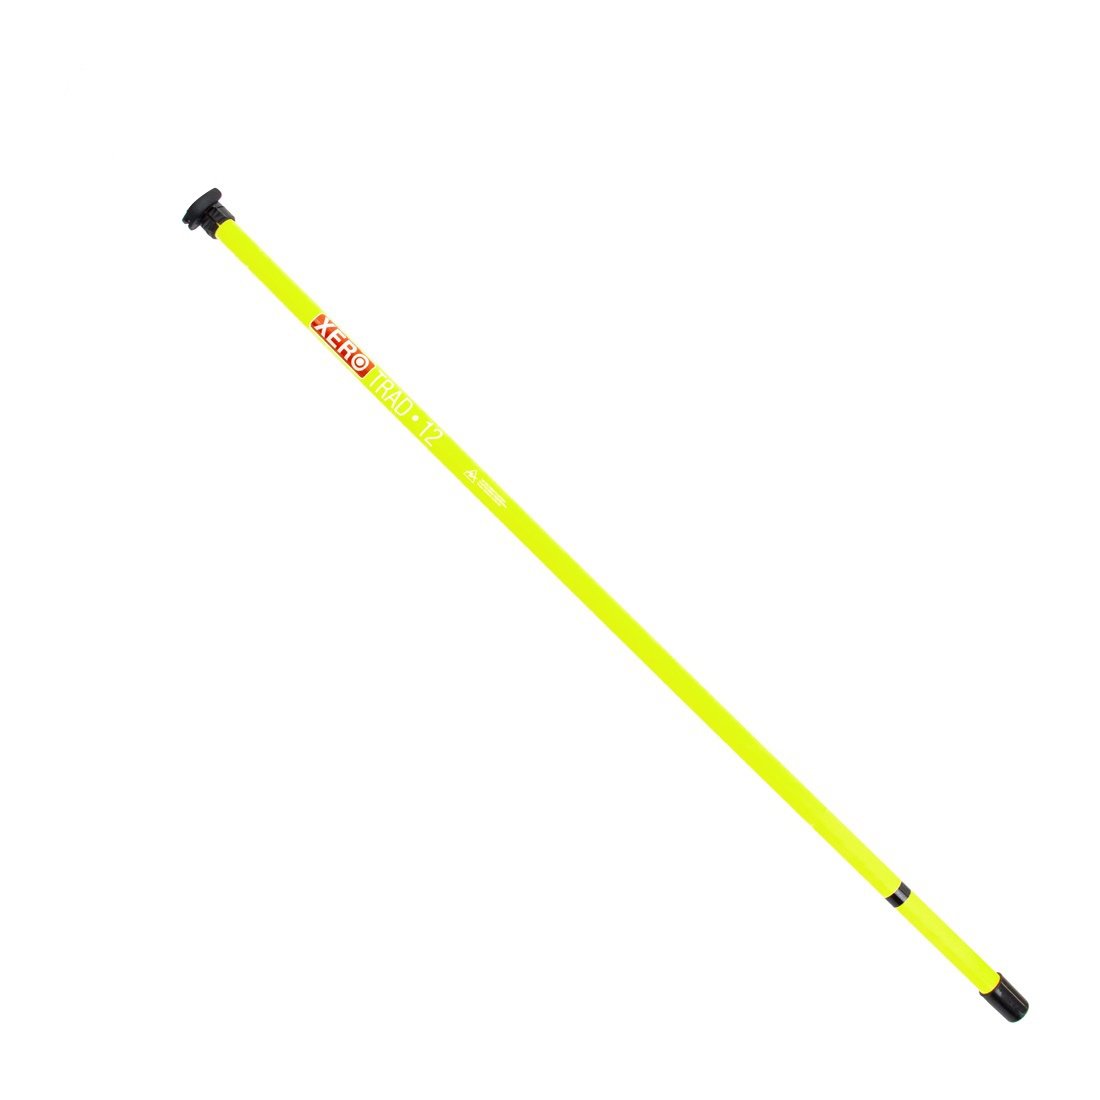 XERO Carbon Fiber Trad Pole 2.0 Replacement Sections Yellow View